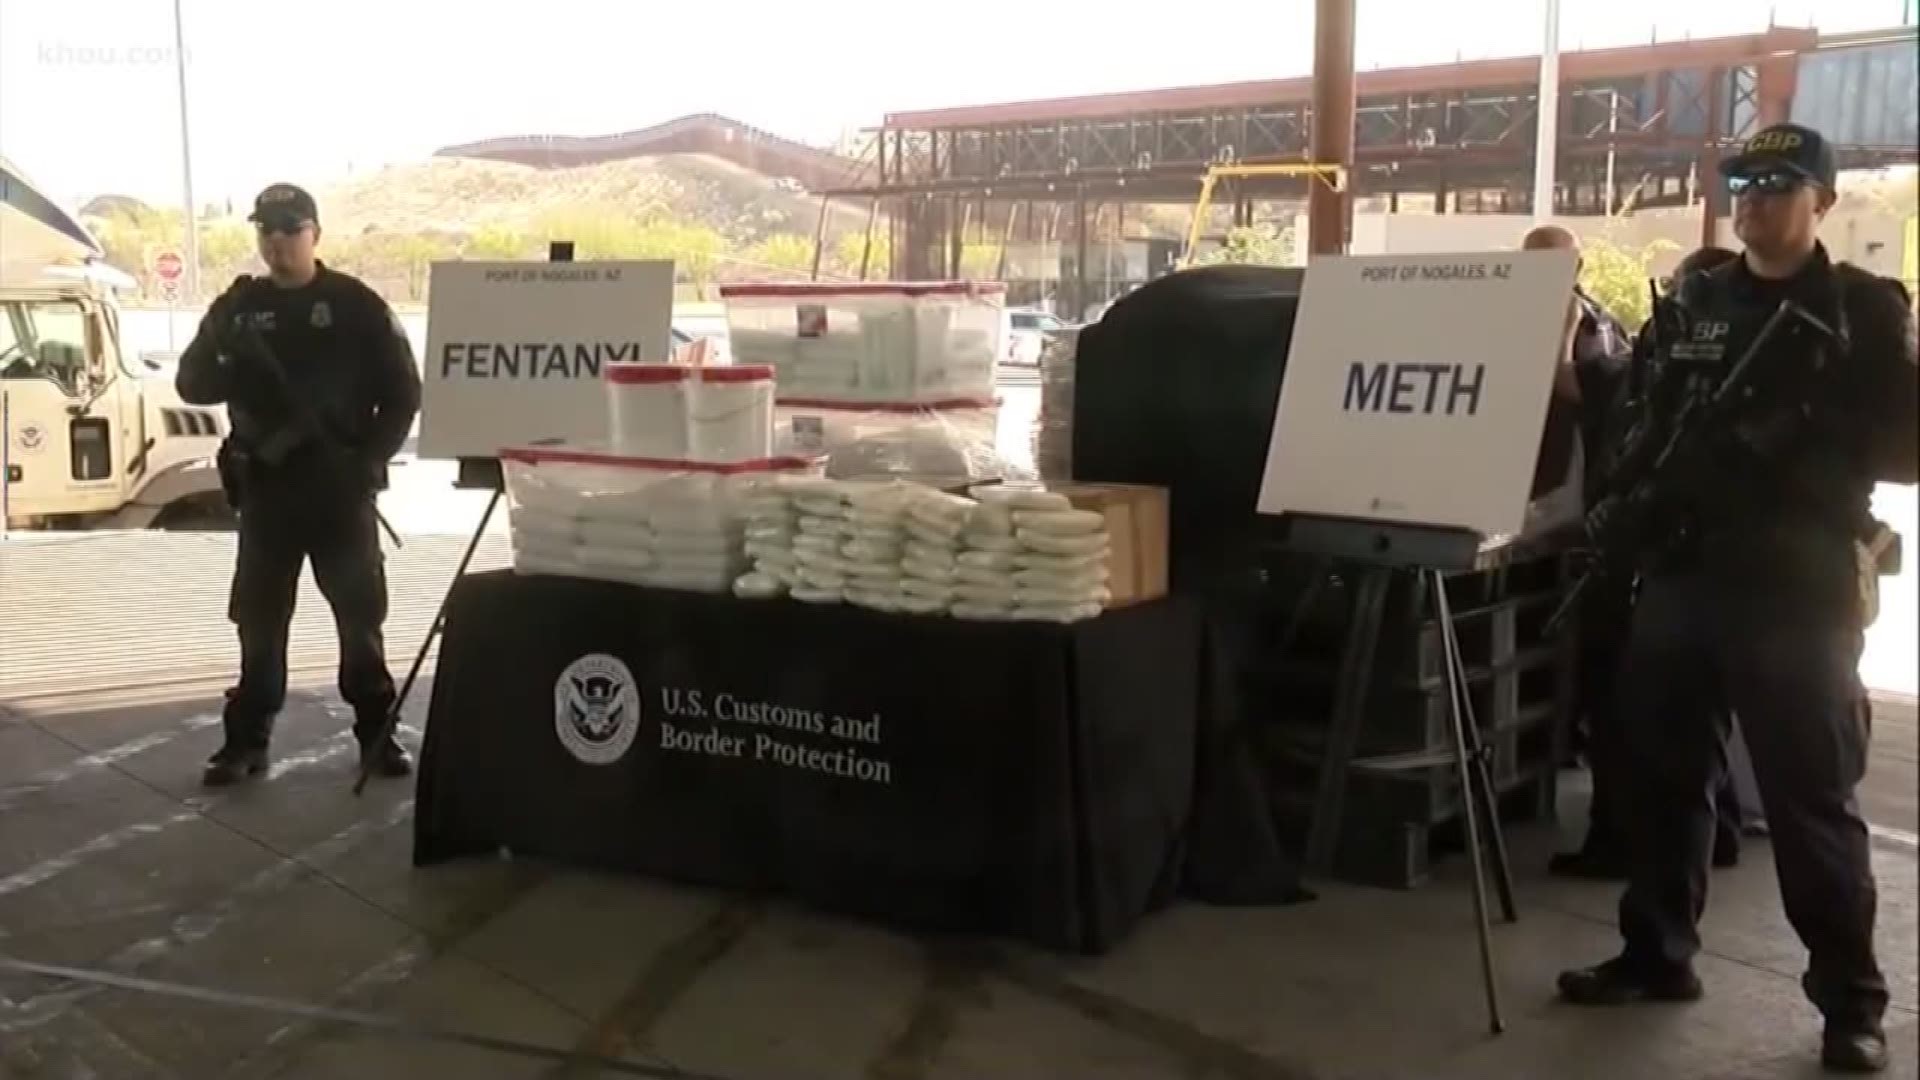 Customs officials seize 140 pounds of meth hidden in paint containers 